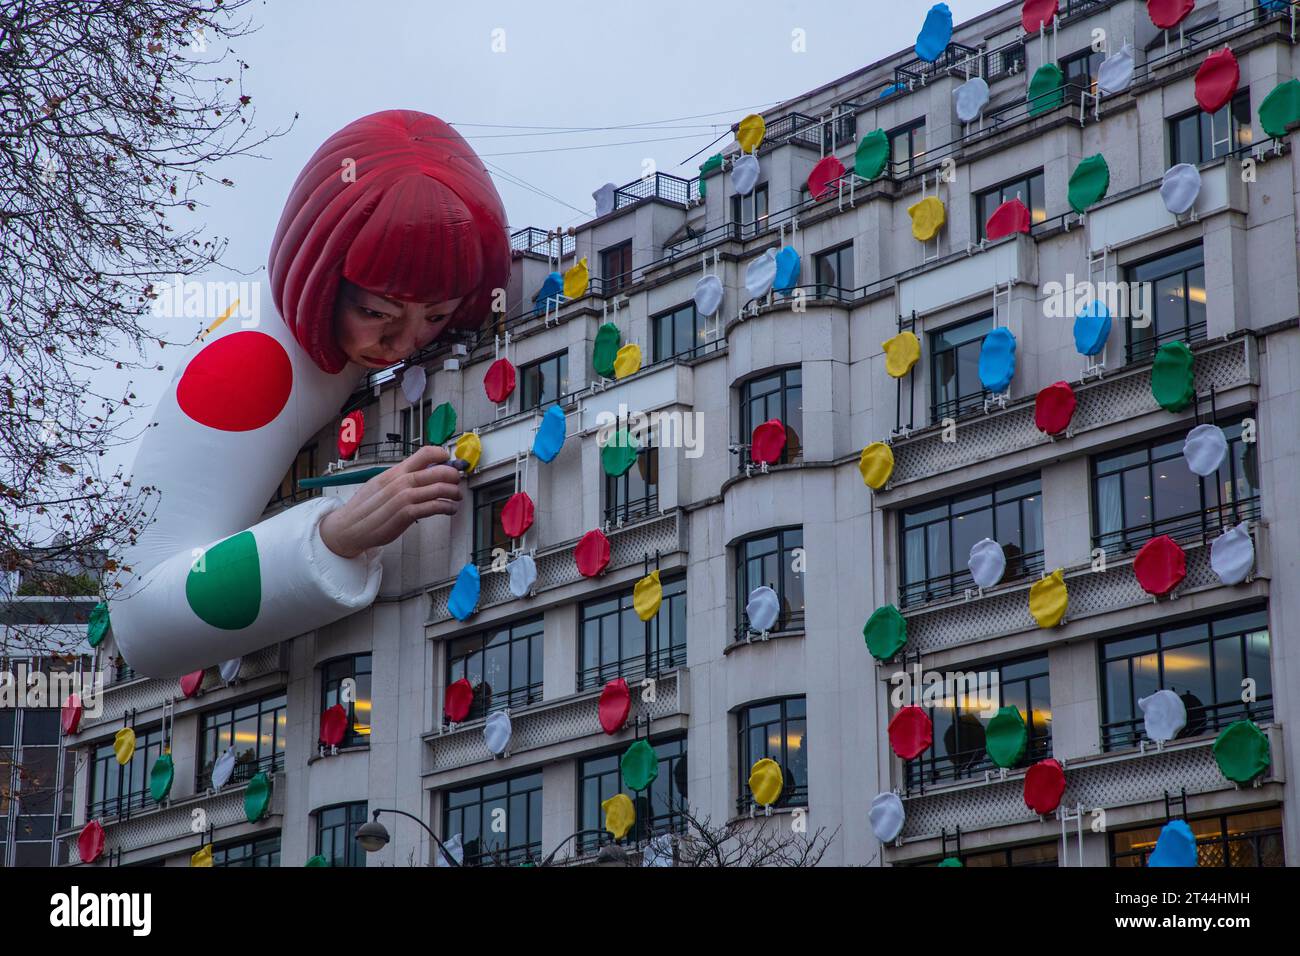 Gigantic figure by the Japanese artist Yayoi Kusama, on the top of the Louis Vuitton department stores', Paris, France. Stock Photo